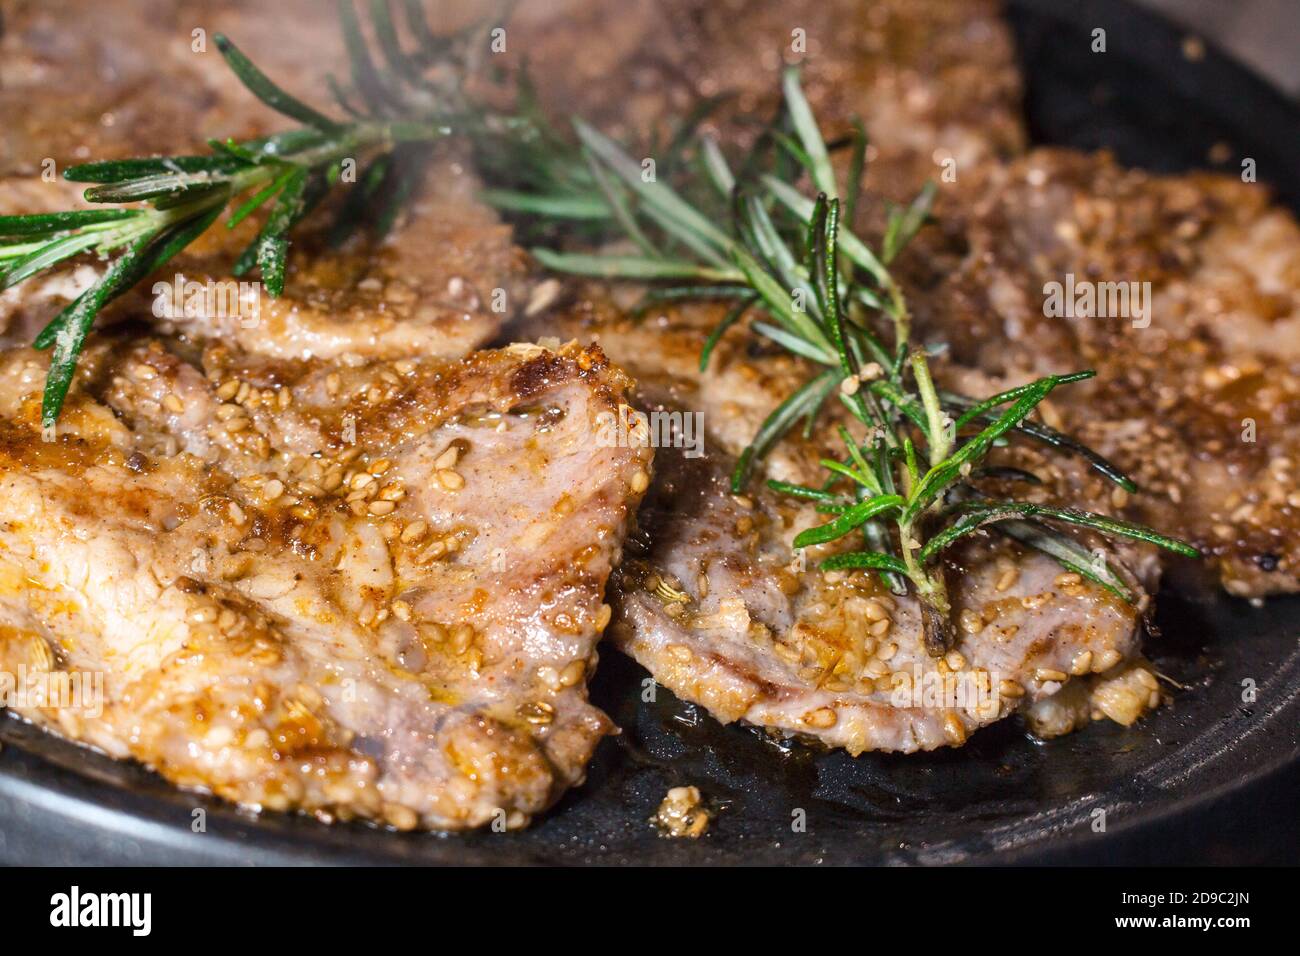 Japanese-style grilled pork slices with sesame, ginger and soy sauce Stock Photo